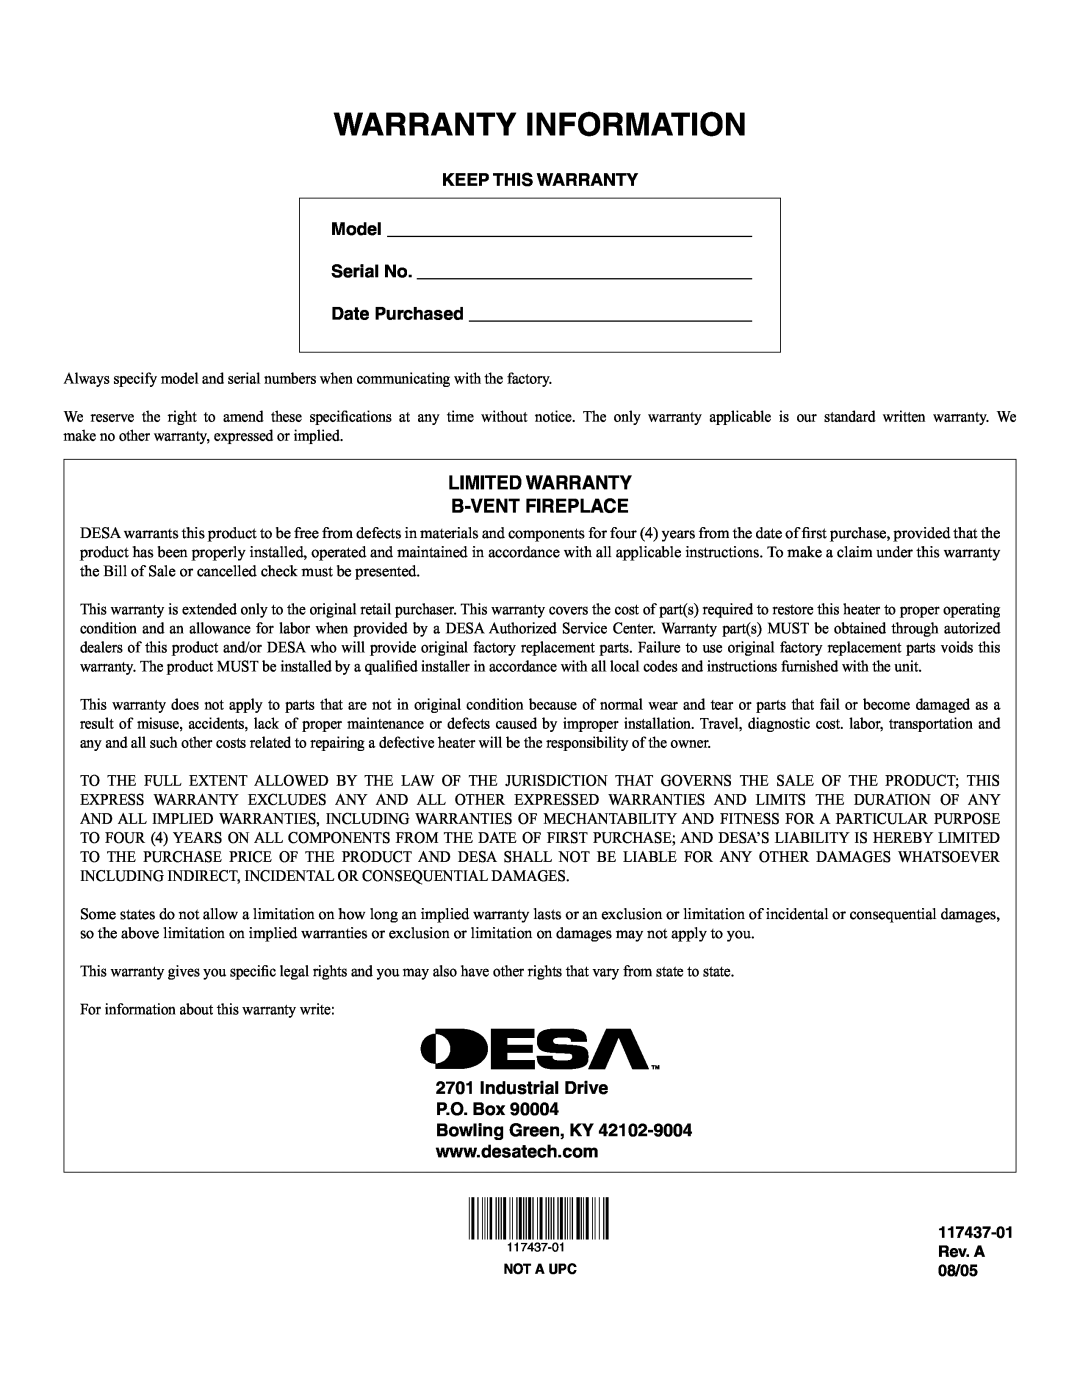 Desa (V) CB36(N Warranty Information, KEEP THIS WARRANTY Model Serial No Date Purchased, Industrial Drive P.O. Box, Rev. A 